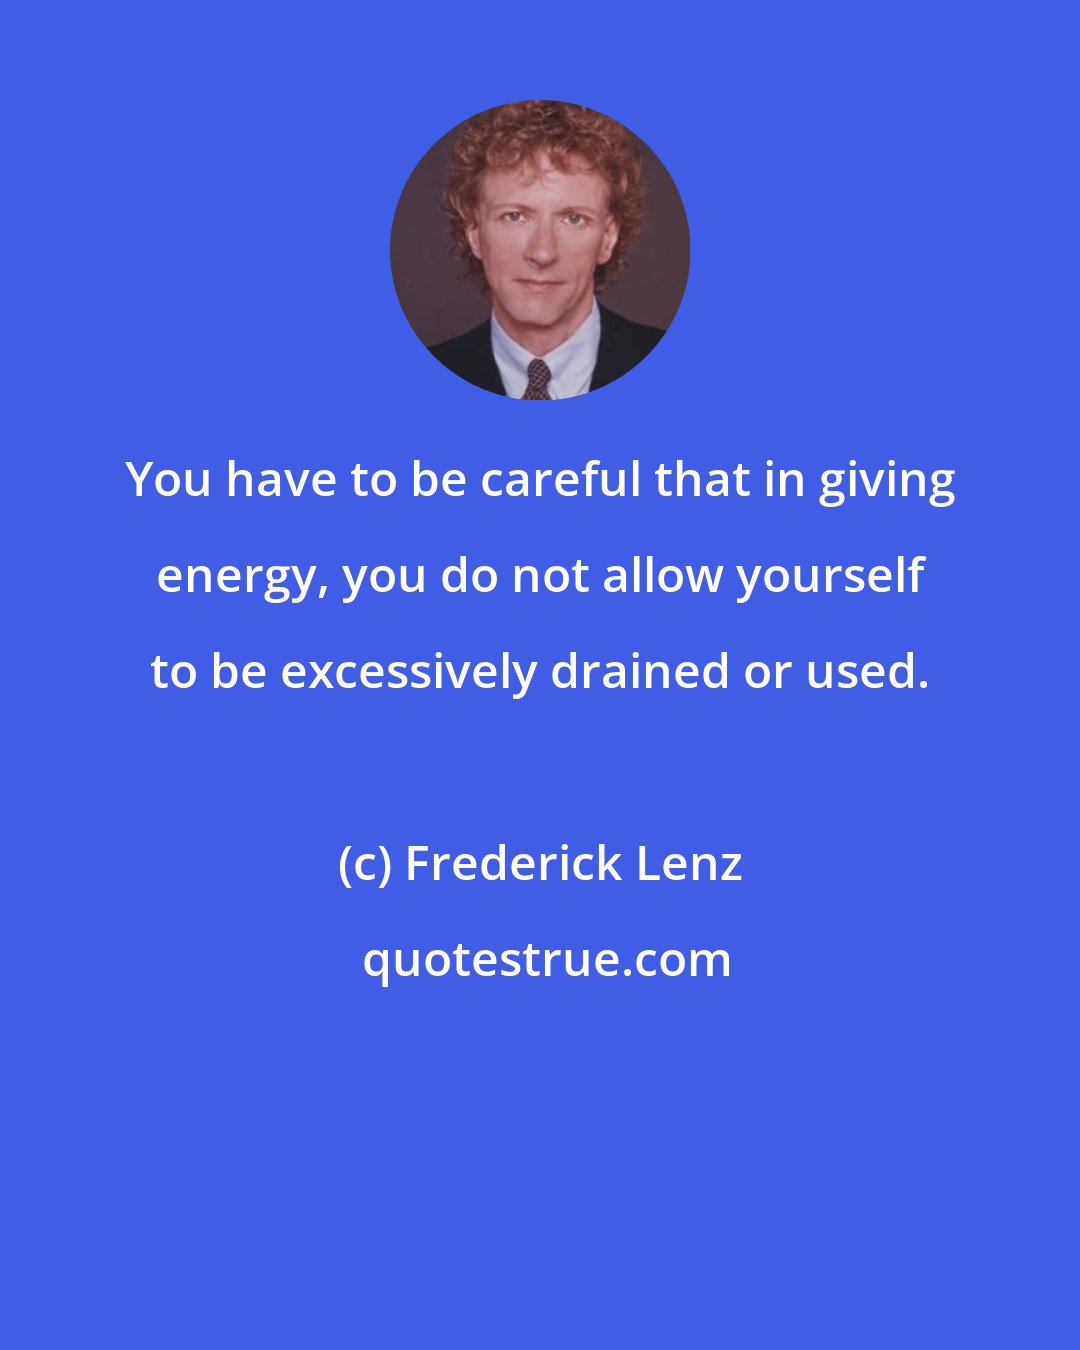 Frederick Lenz: You have to be careful that in giving energy, you do not allow yourself to be excessively drained or used.